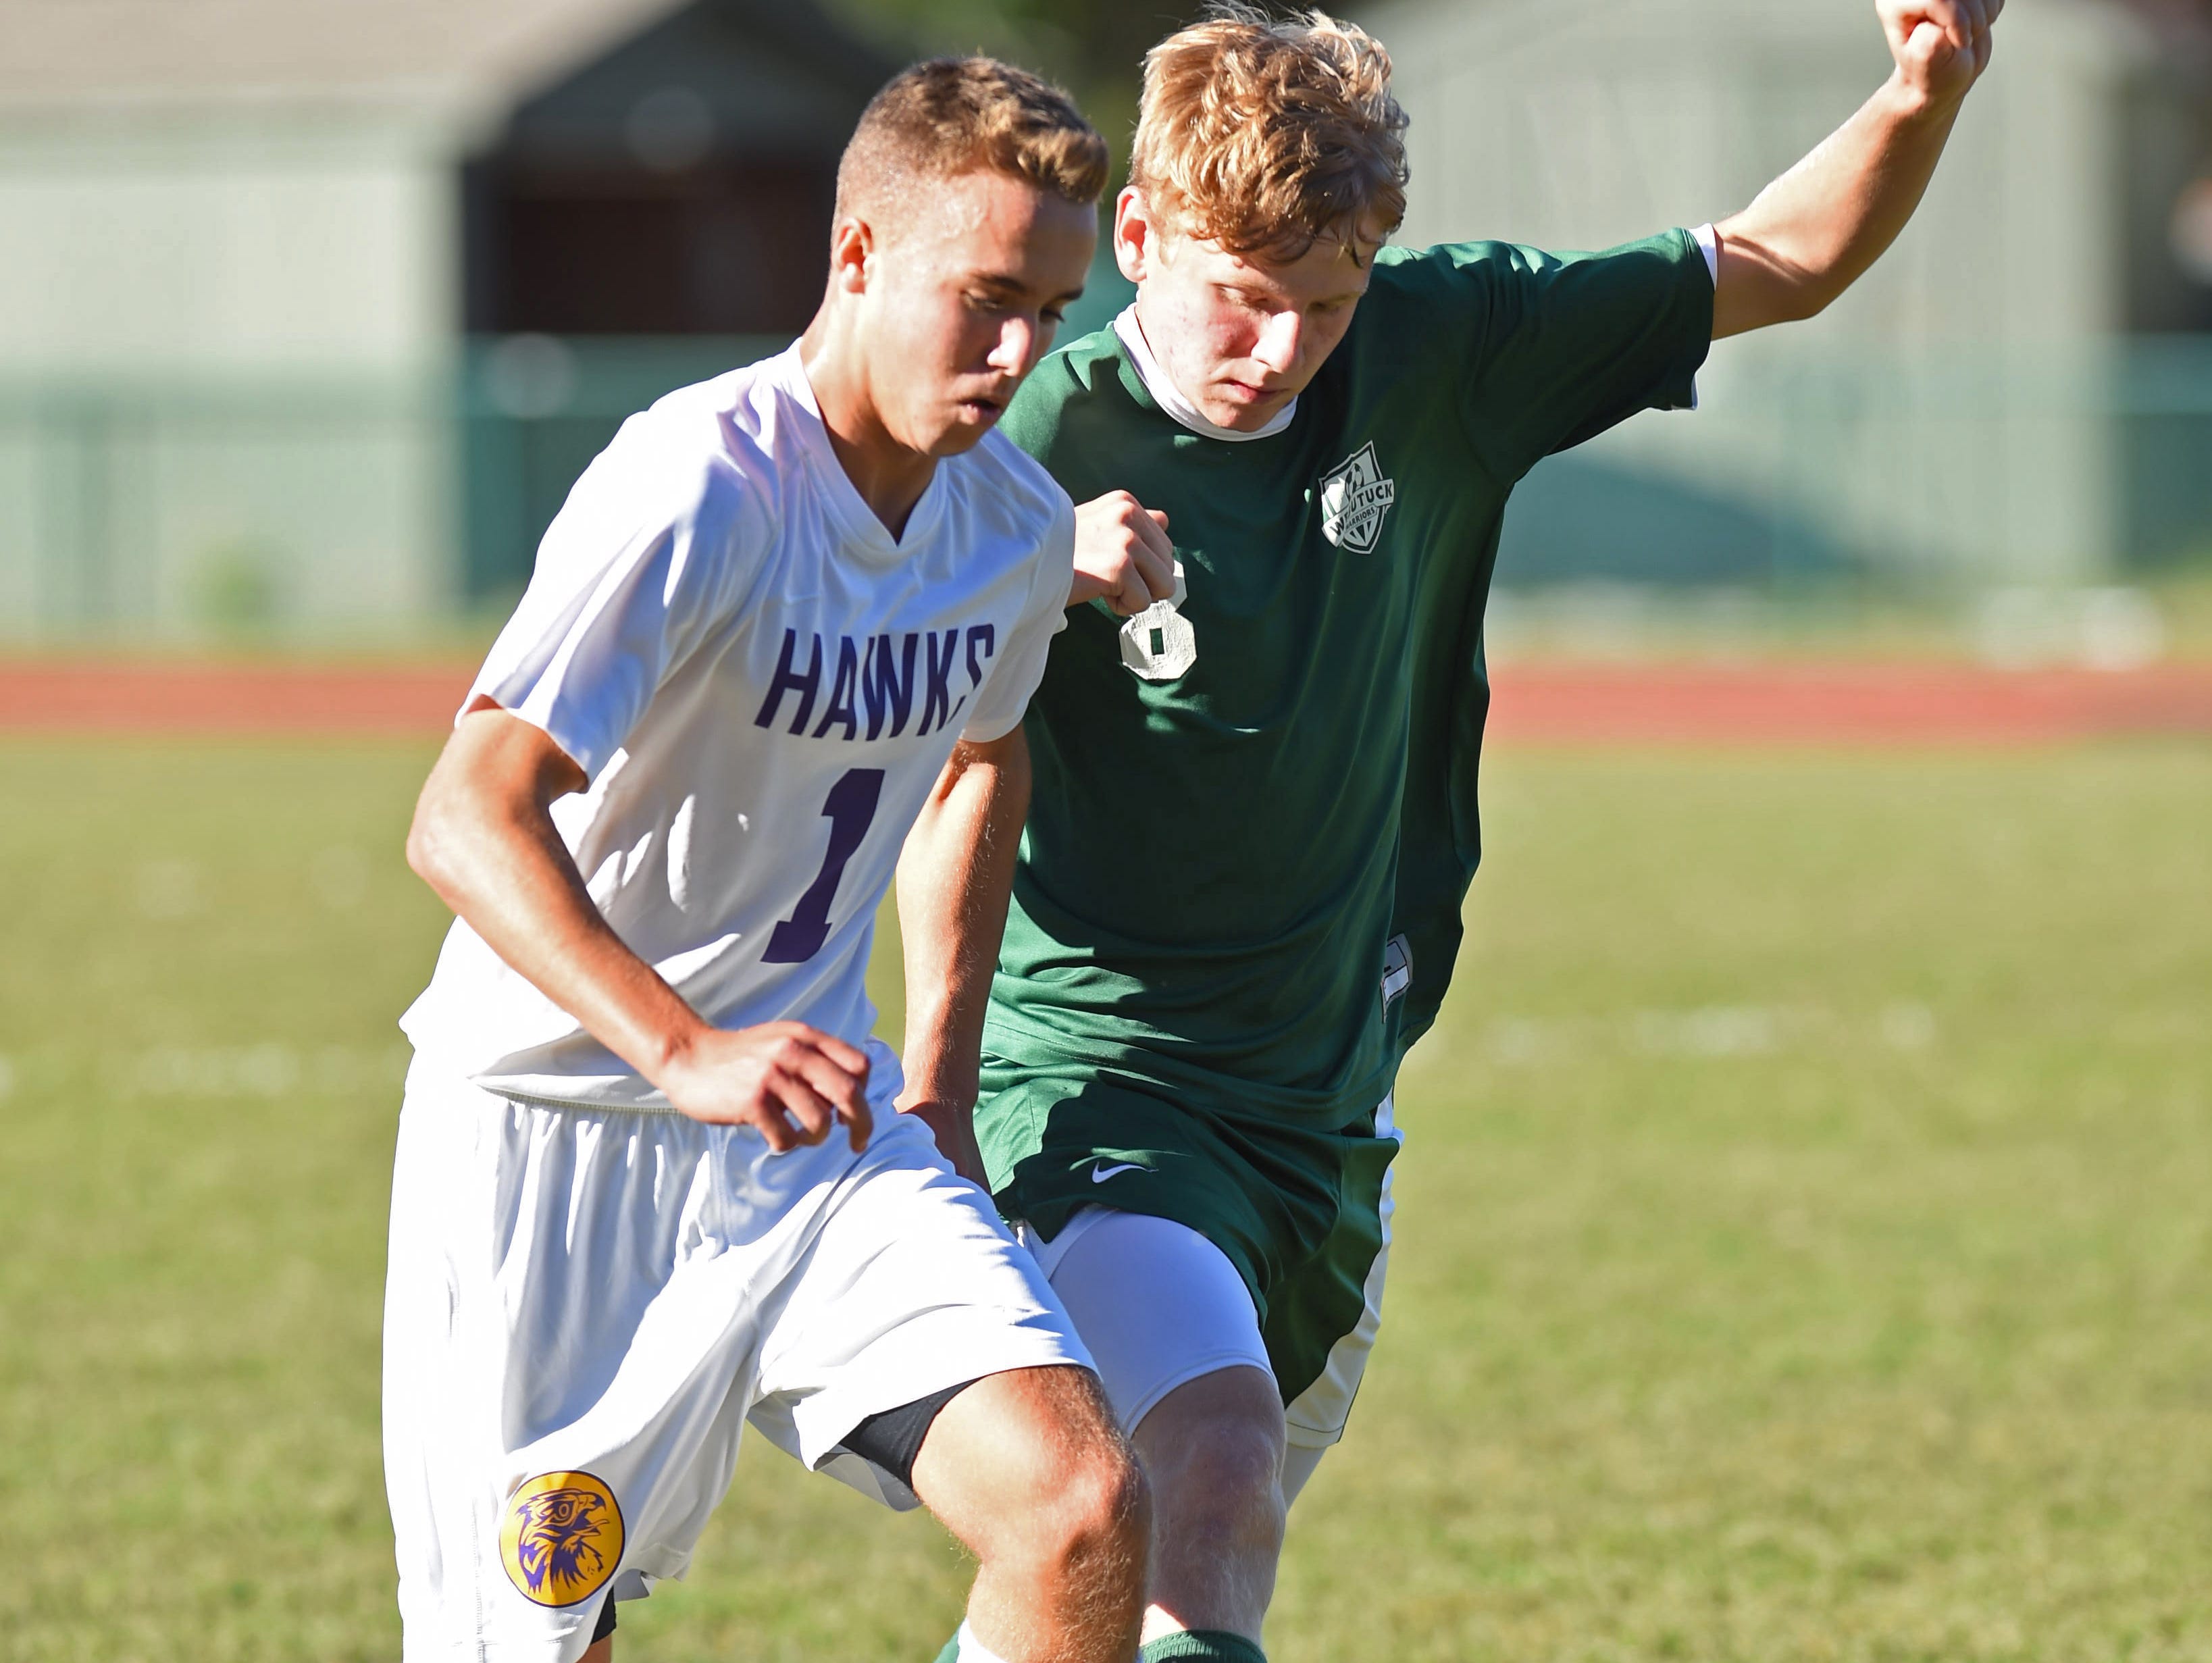 Rhinebeck's Quinn Graziano keeps ahead of Webutuck's Ethan Lounsbury during Thursday's 1-1 tie in Rhinebeck.